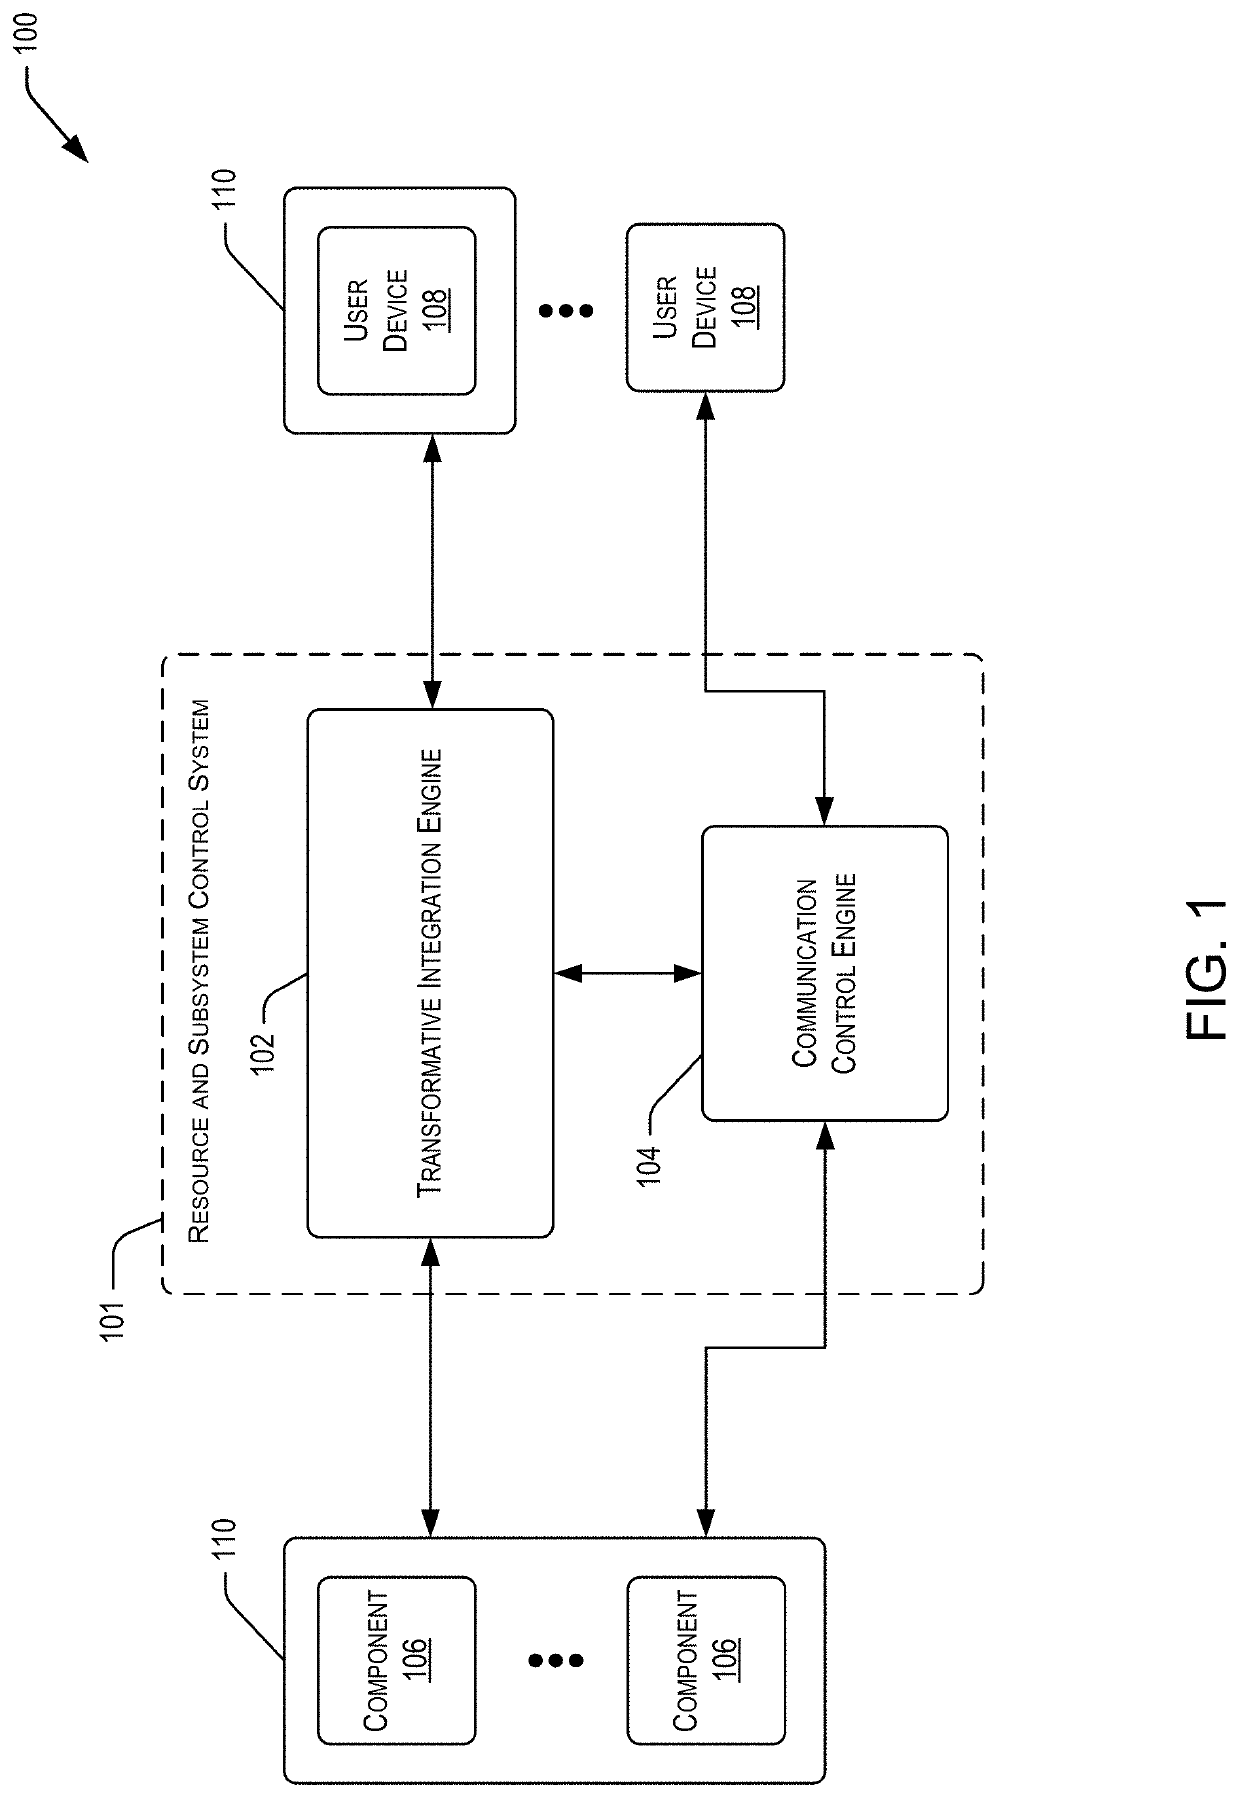 Systems and methods for multi-tier resource and subsystem orchestration and adaptation